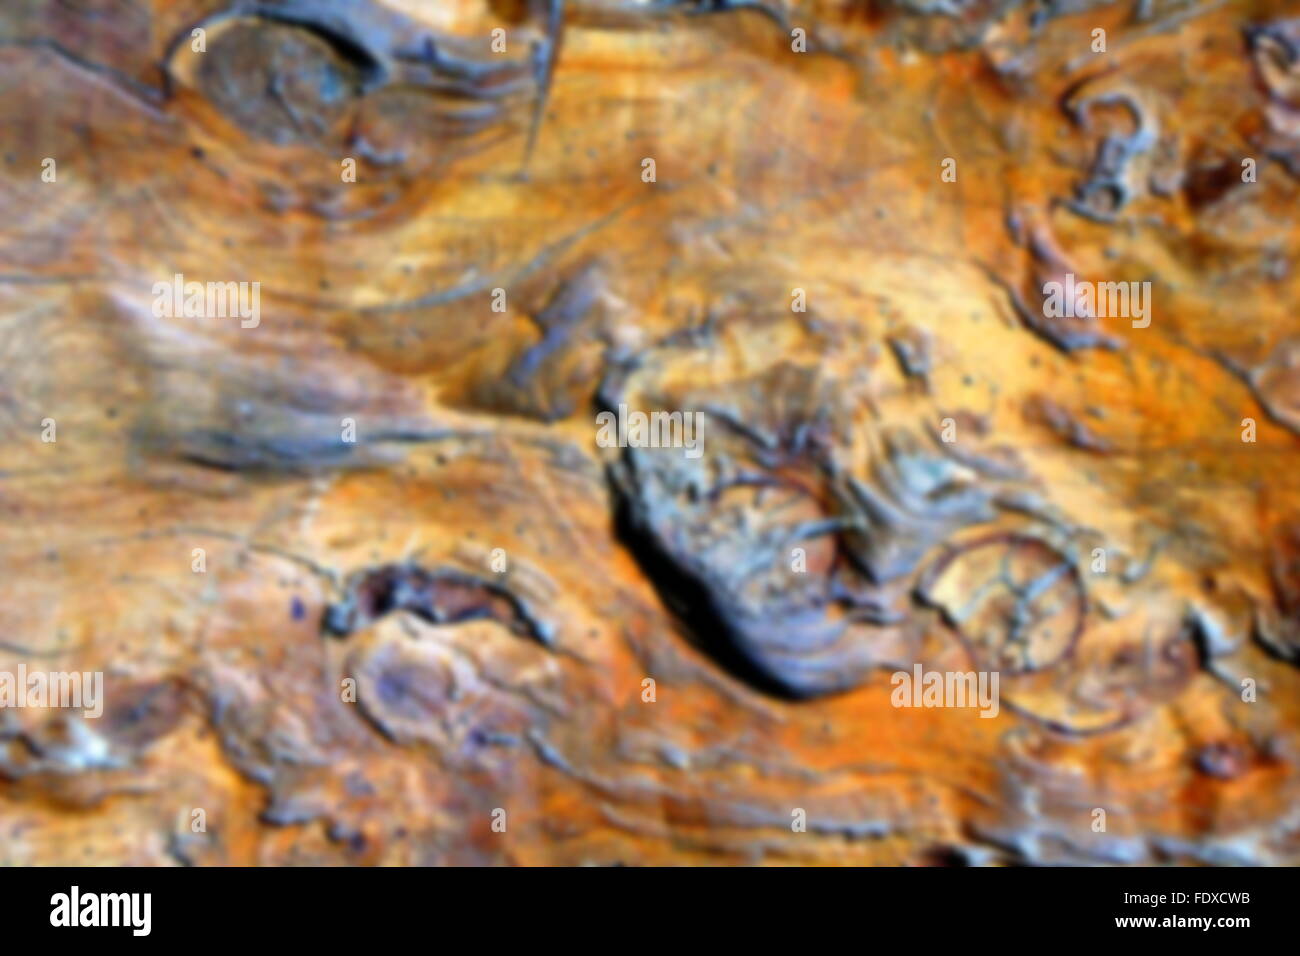 blurry background of a textured wood plank Stock Photo